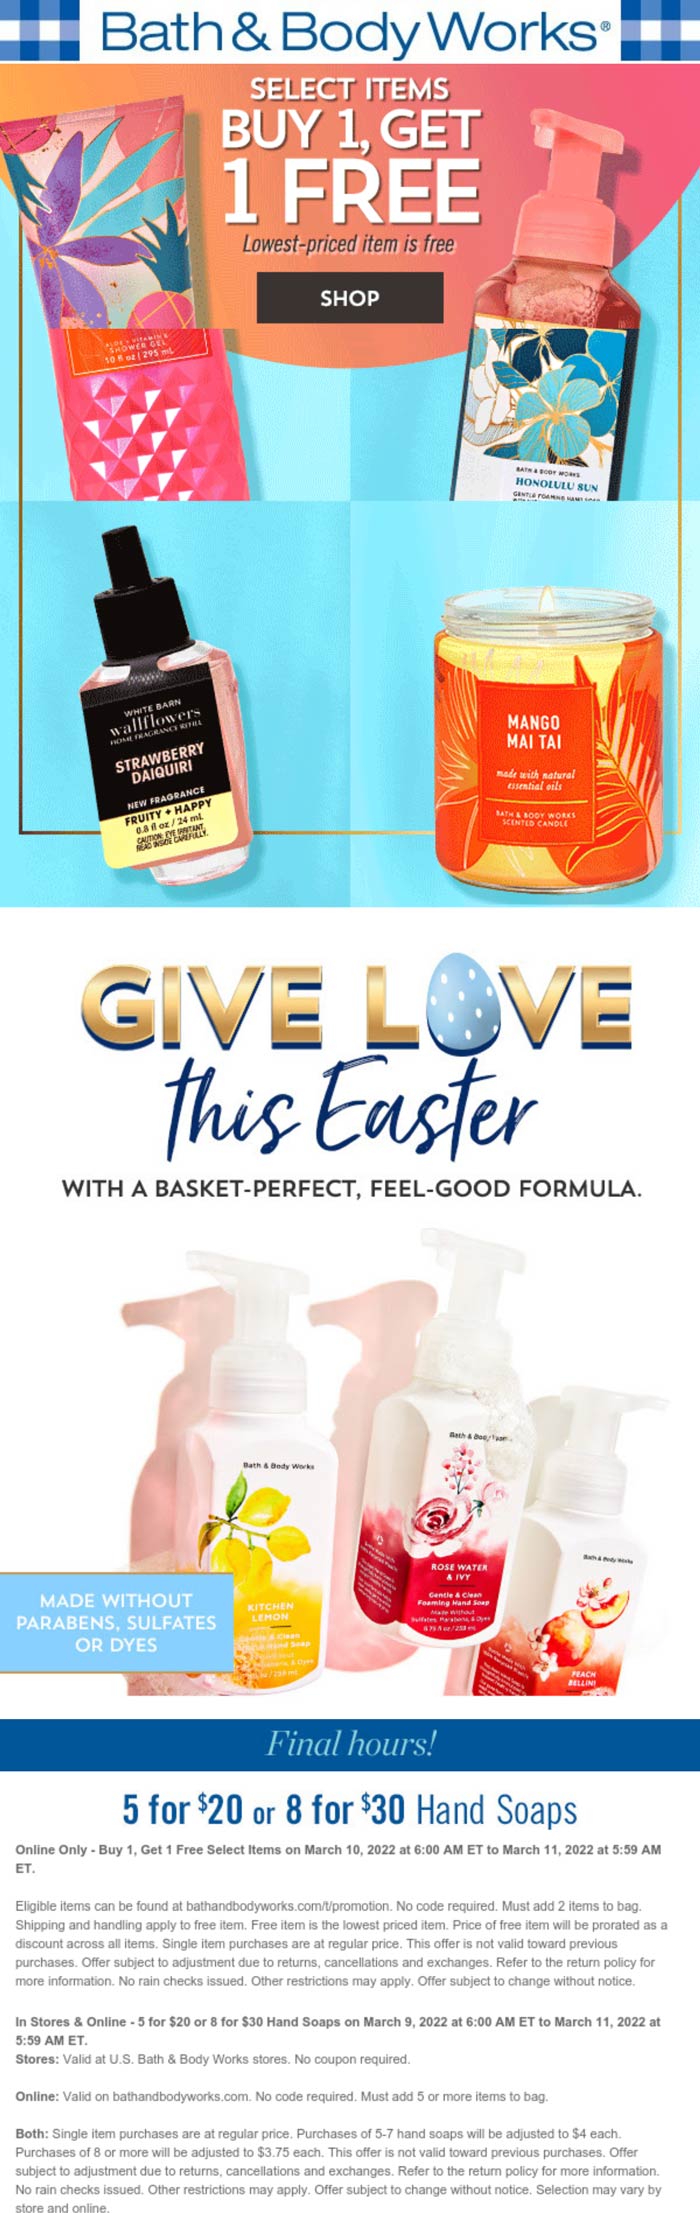 Bath & Body Works stores Coupon  Second tropical scented item free online today at Bath & Body Works #bathbodyworks 